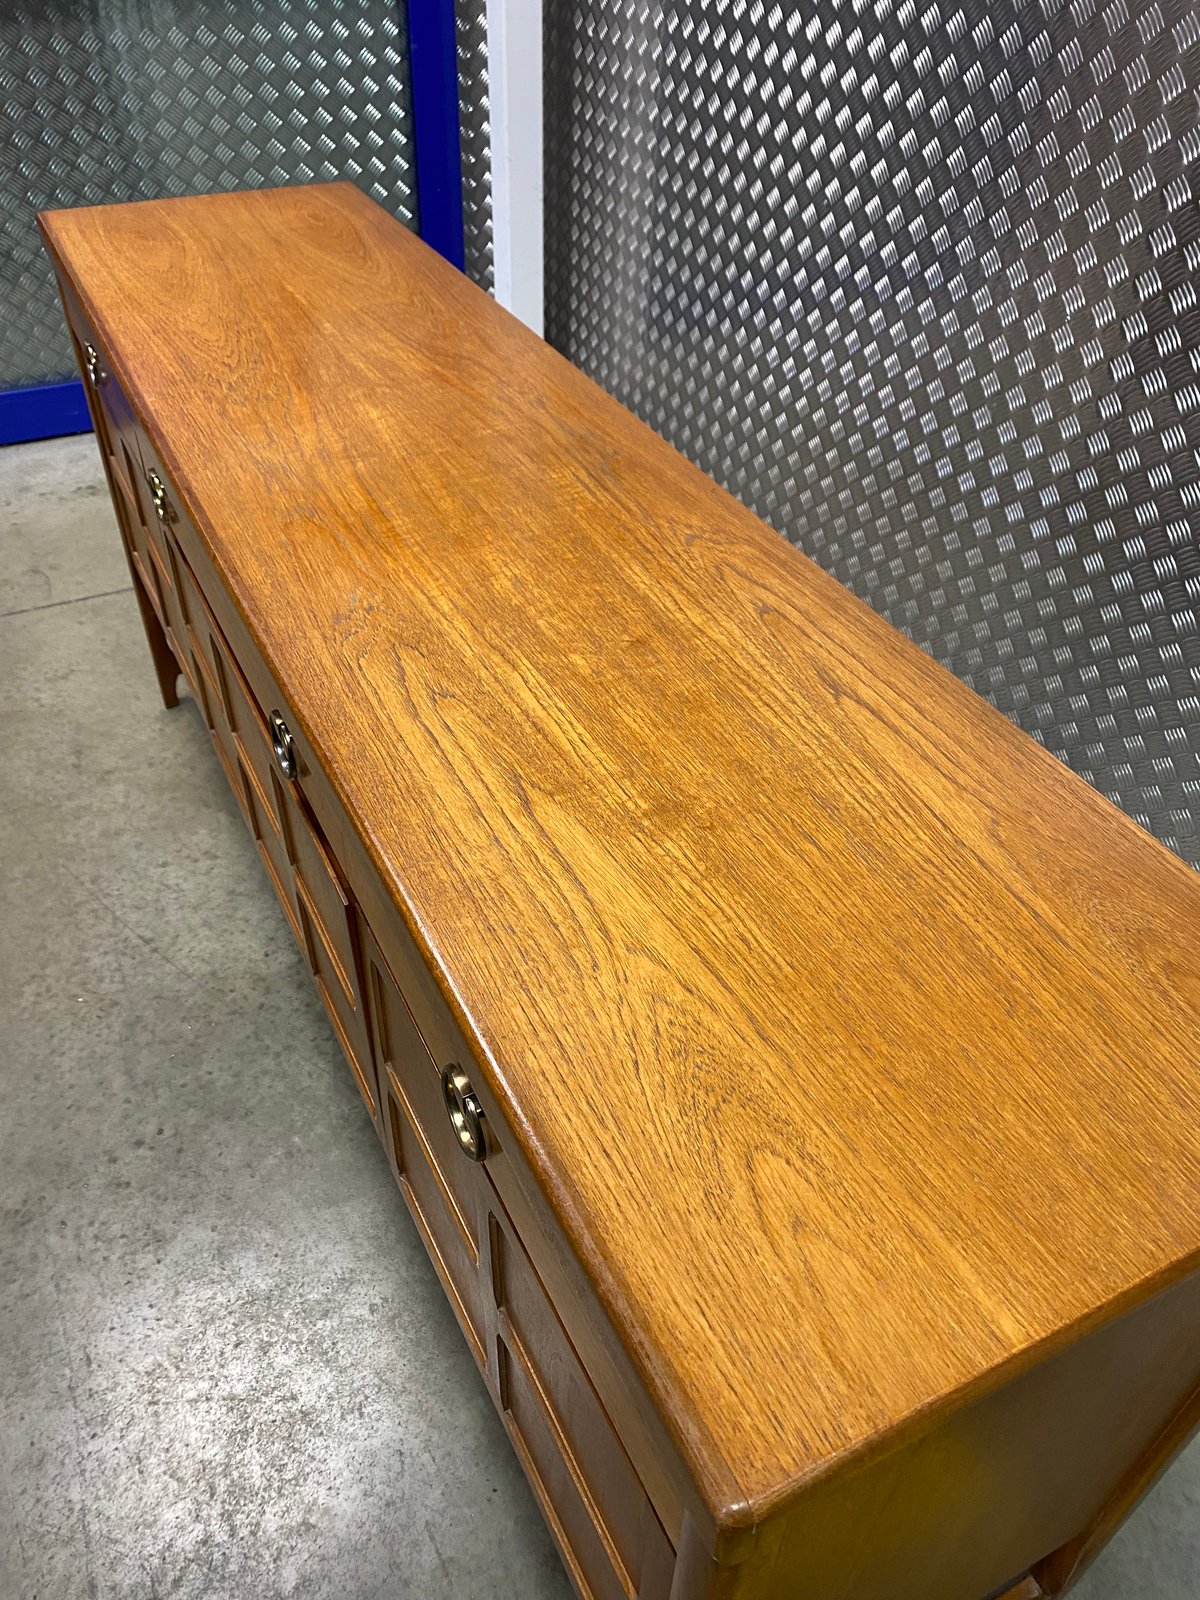 Nathan Square Sideboard - commision - deposit 